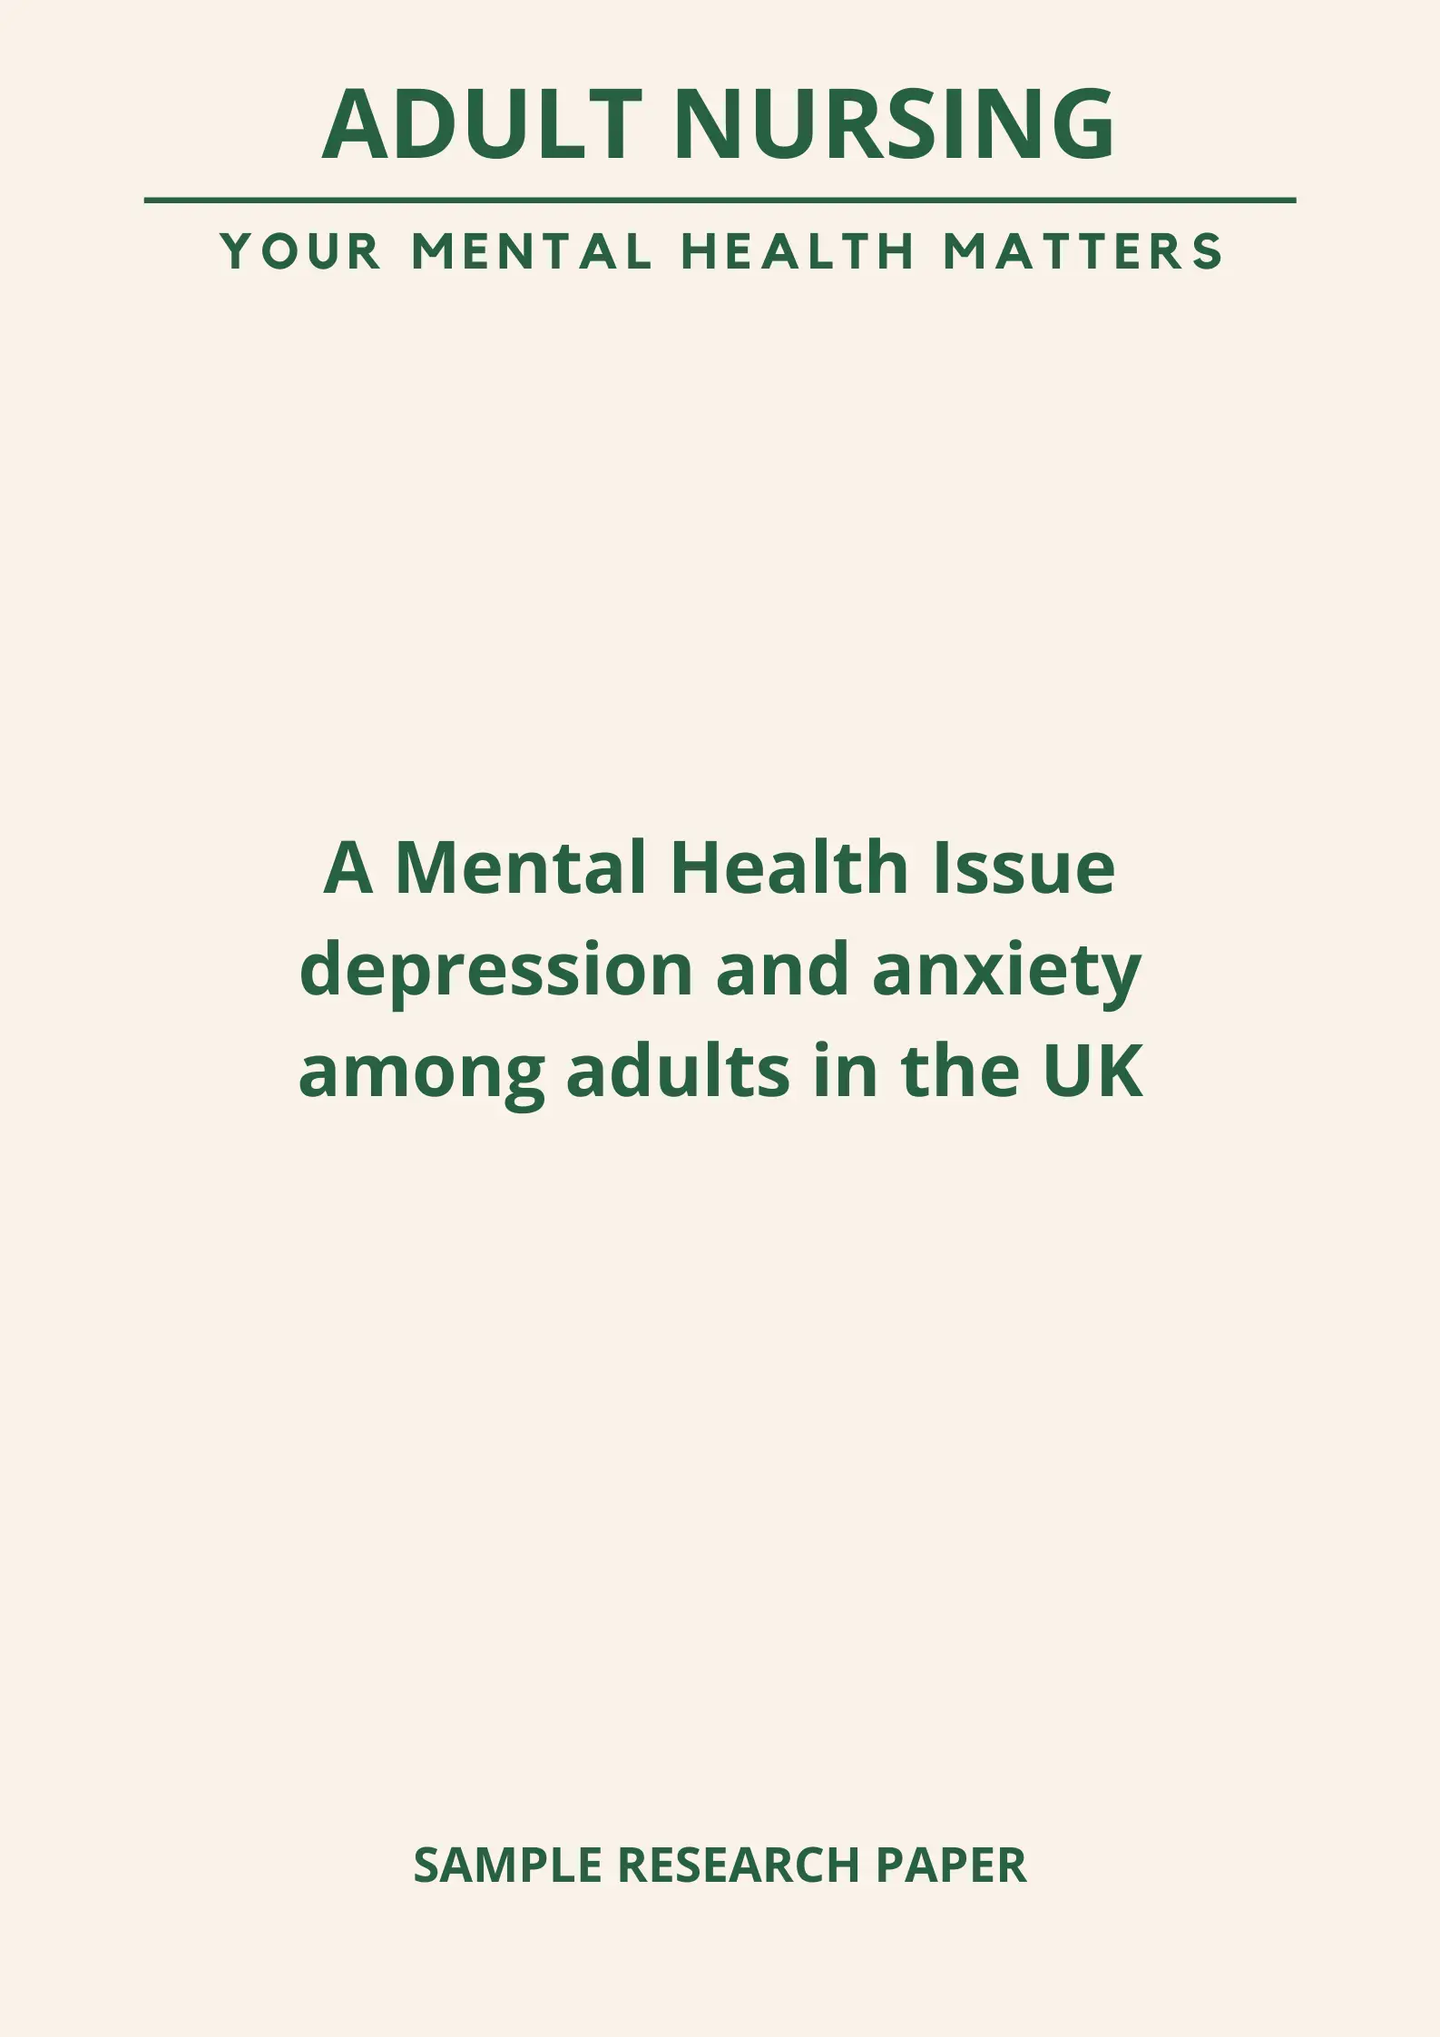 Adult Nursing - A Mental Health ; Issue Research PaperWhat is the effectiveness of antidepressants over CBT in the management of depression and anxiety among adults?